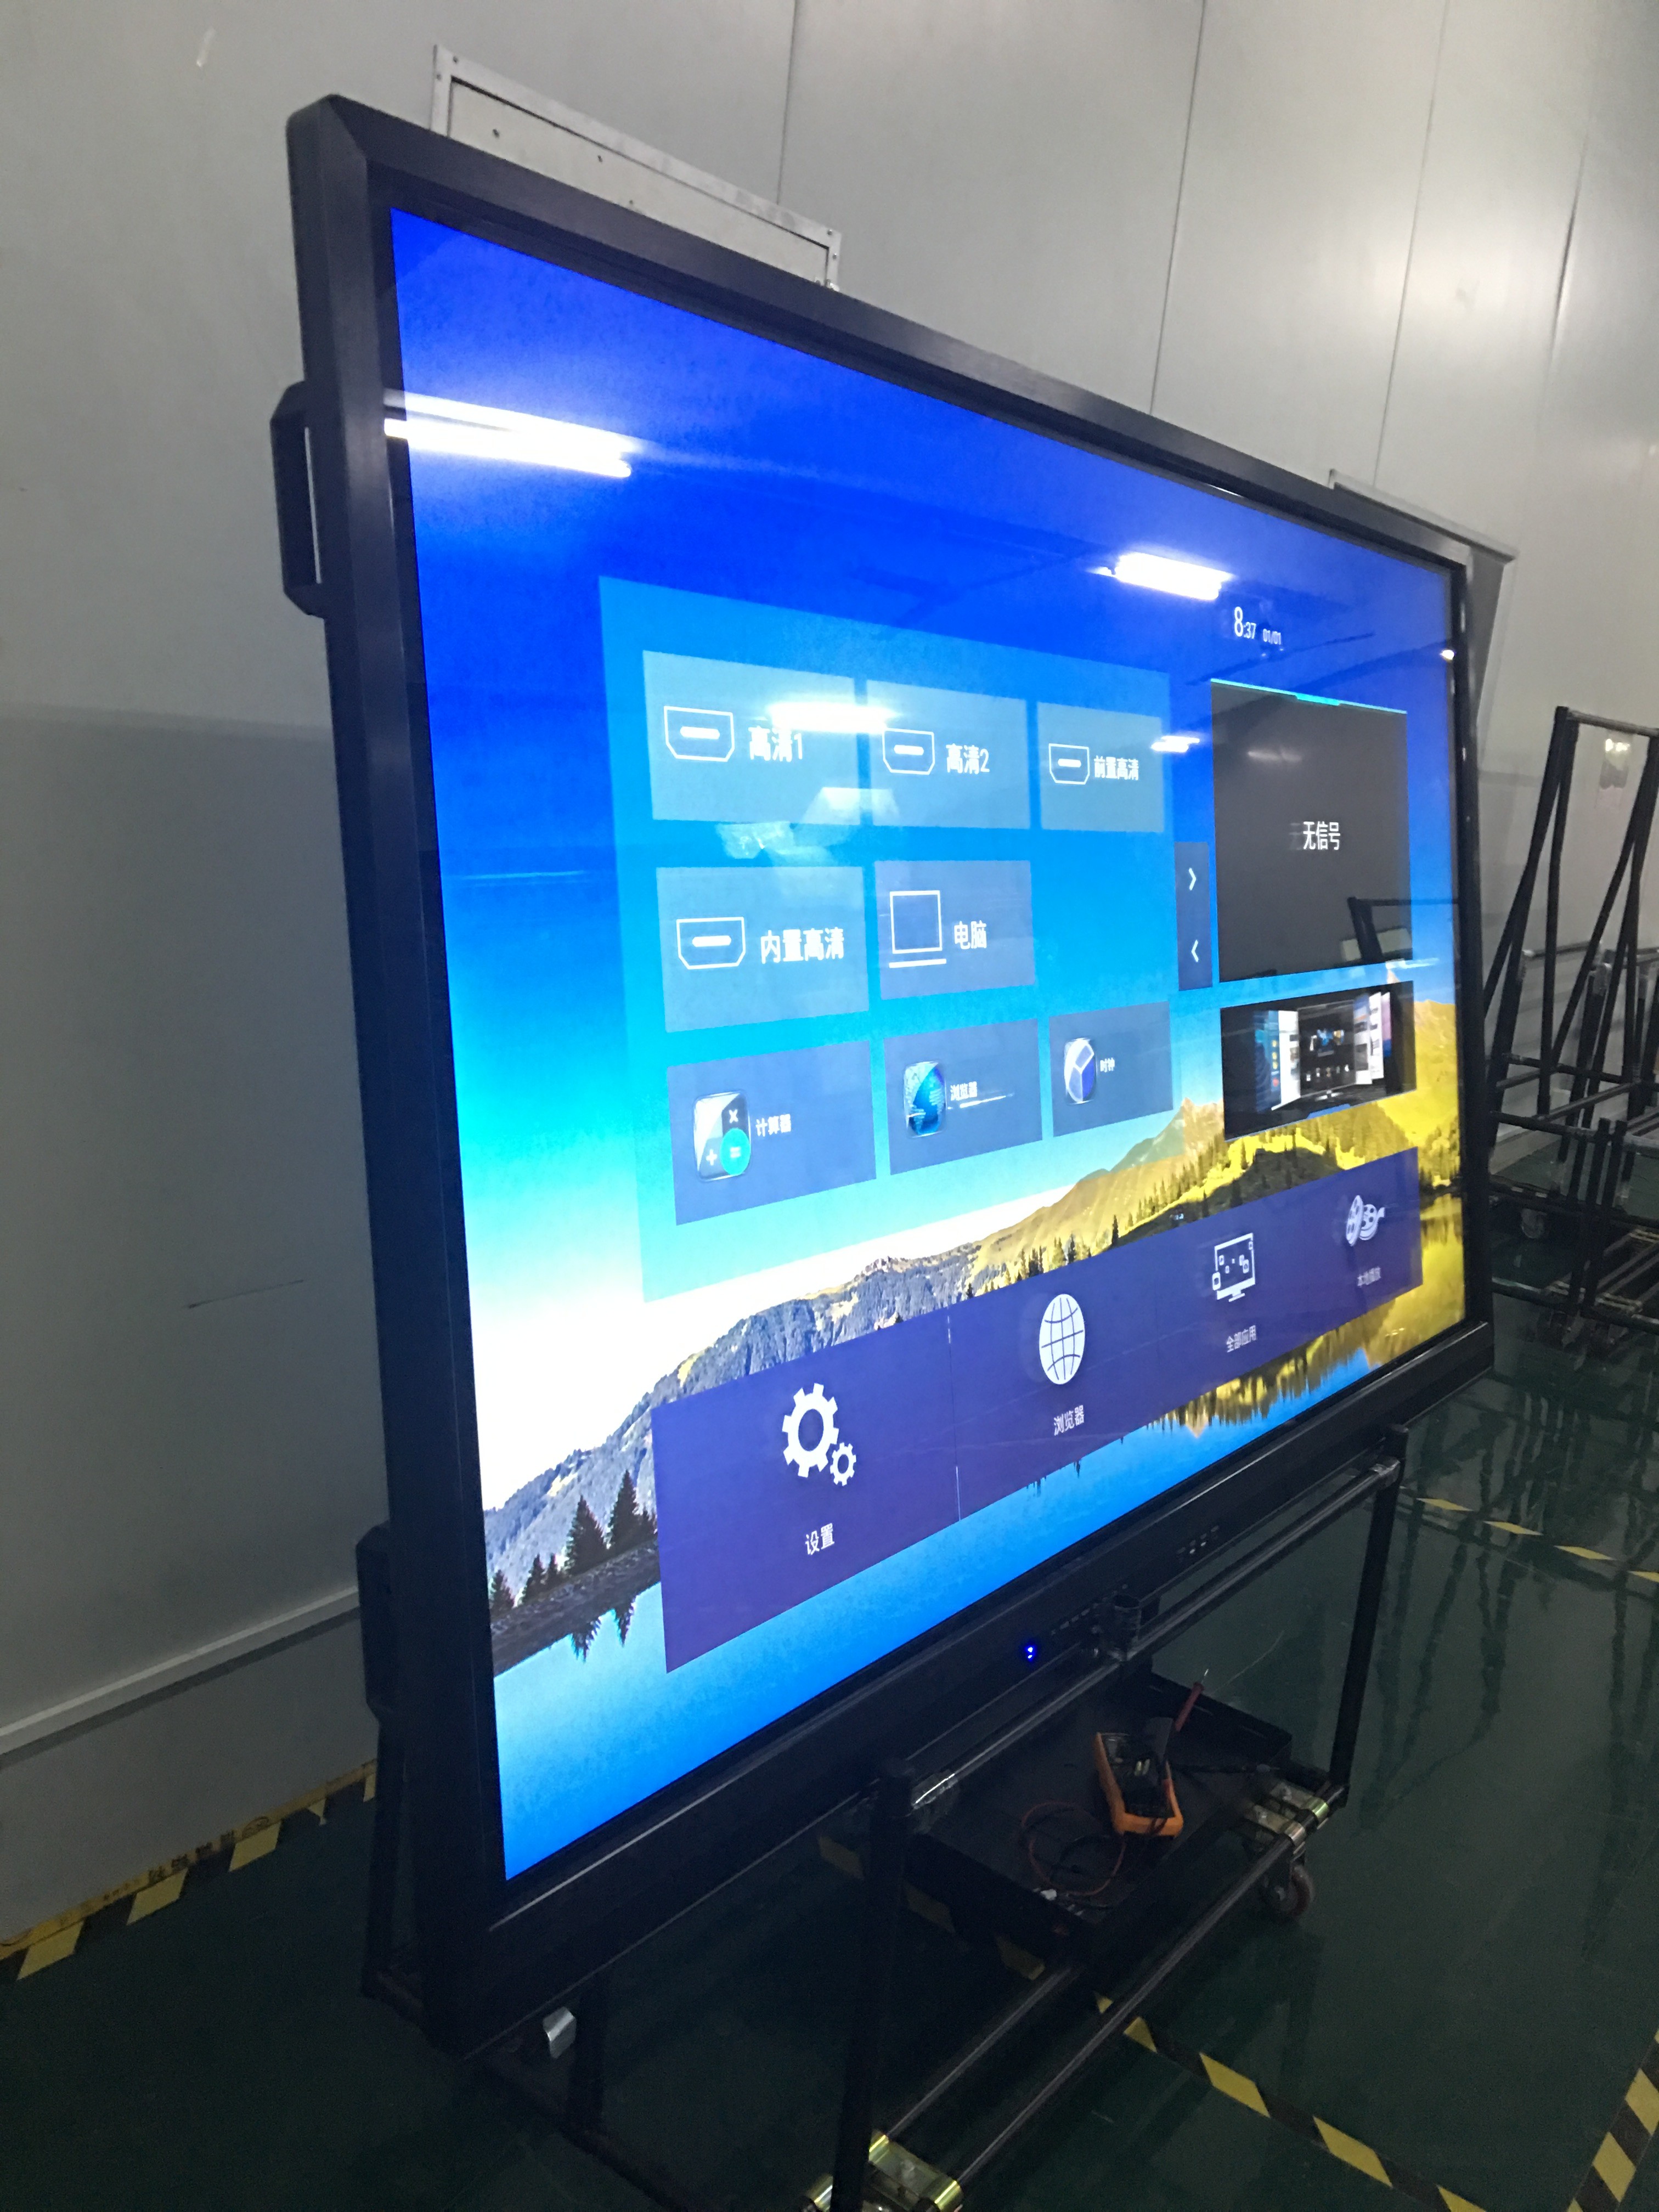 86inch Infrared Interactive Android &Windows touch screen computer OPC built-in Display